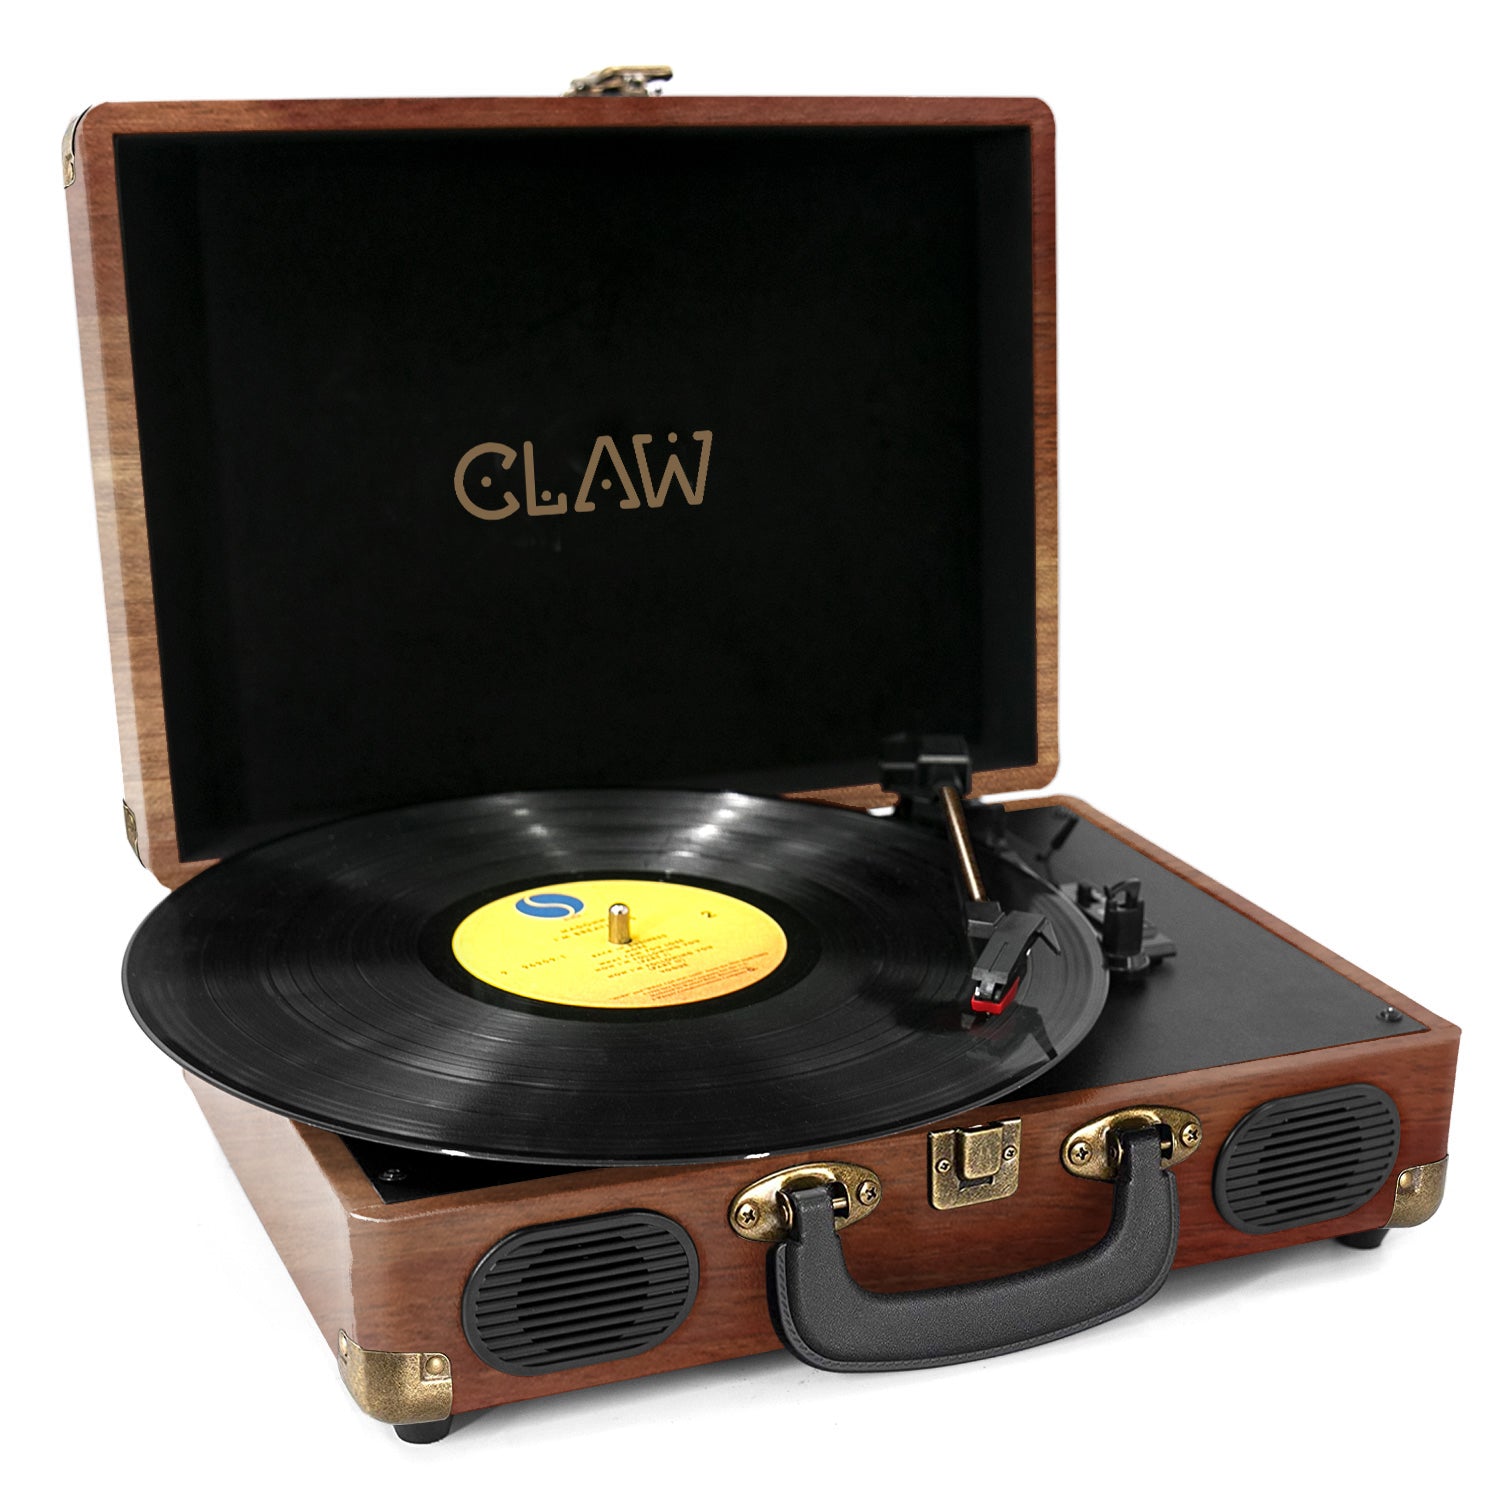 CLAW Stag Portable - Turntable with built-in stereo speaker (Red Wood) (Use Code Origin5 to Get 5% Discount)